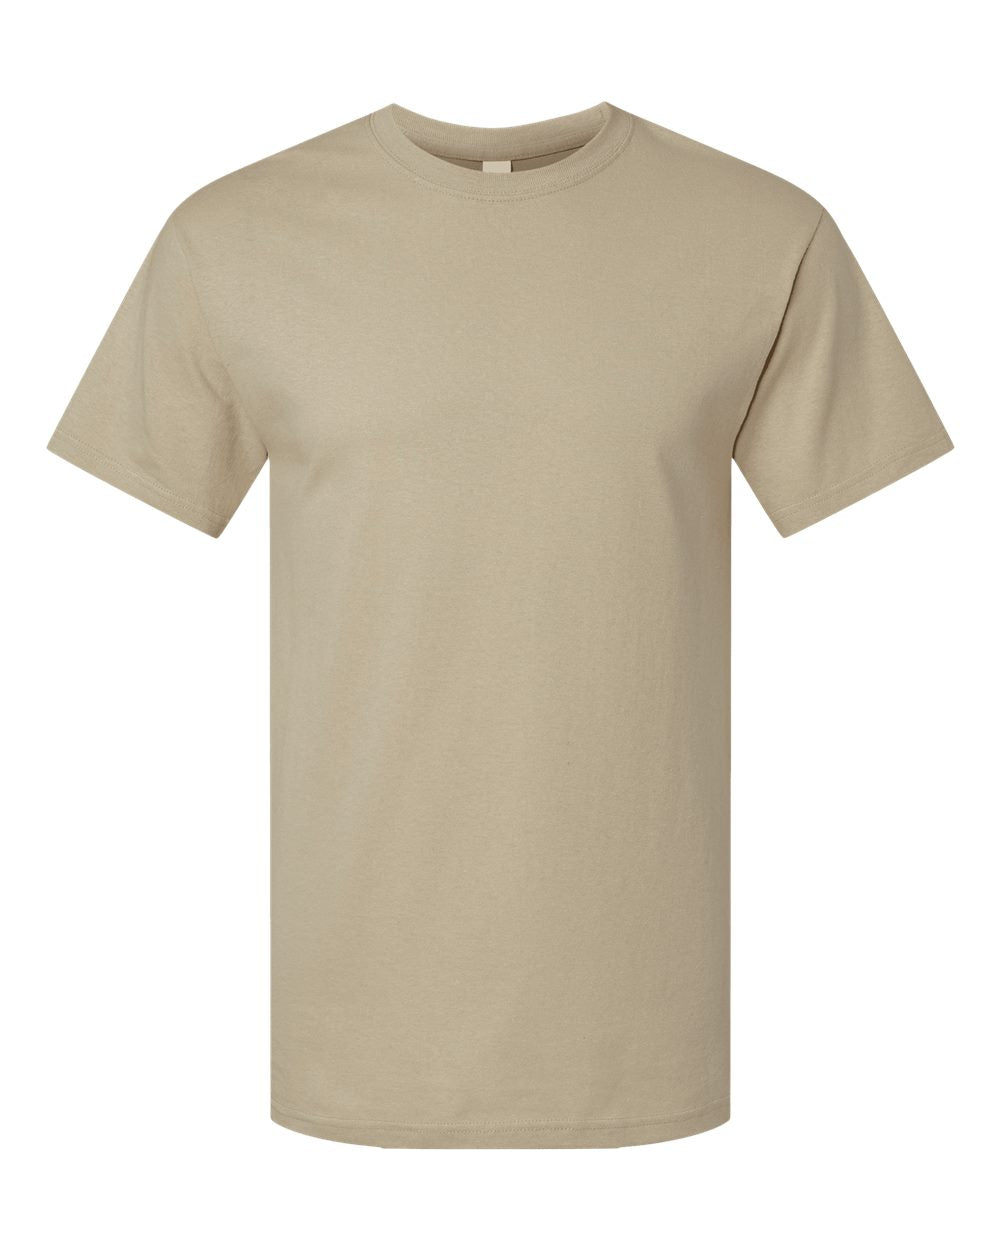 Pretreated M&O 4800 Gold Soft Touch T-Shirt